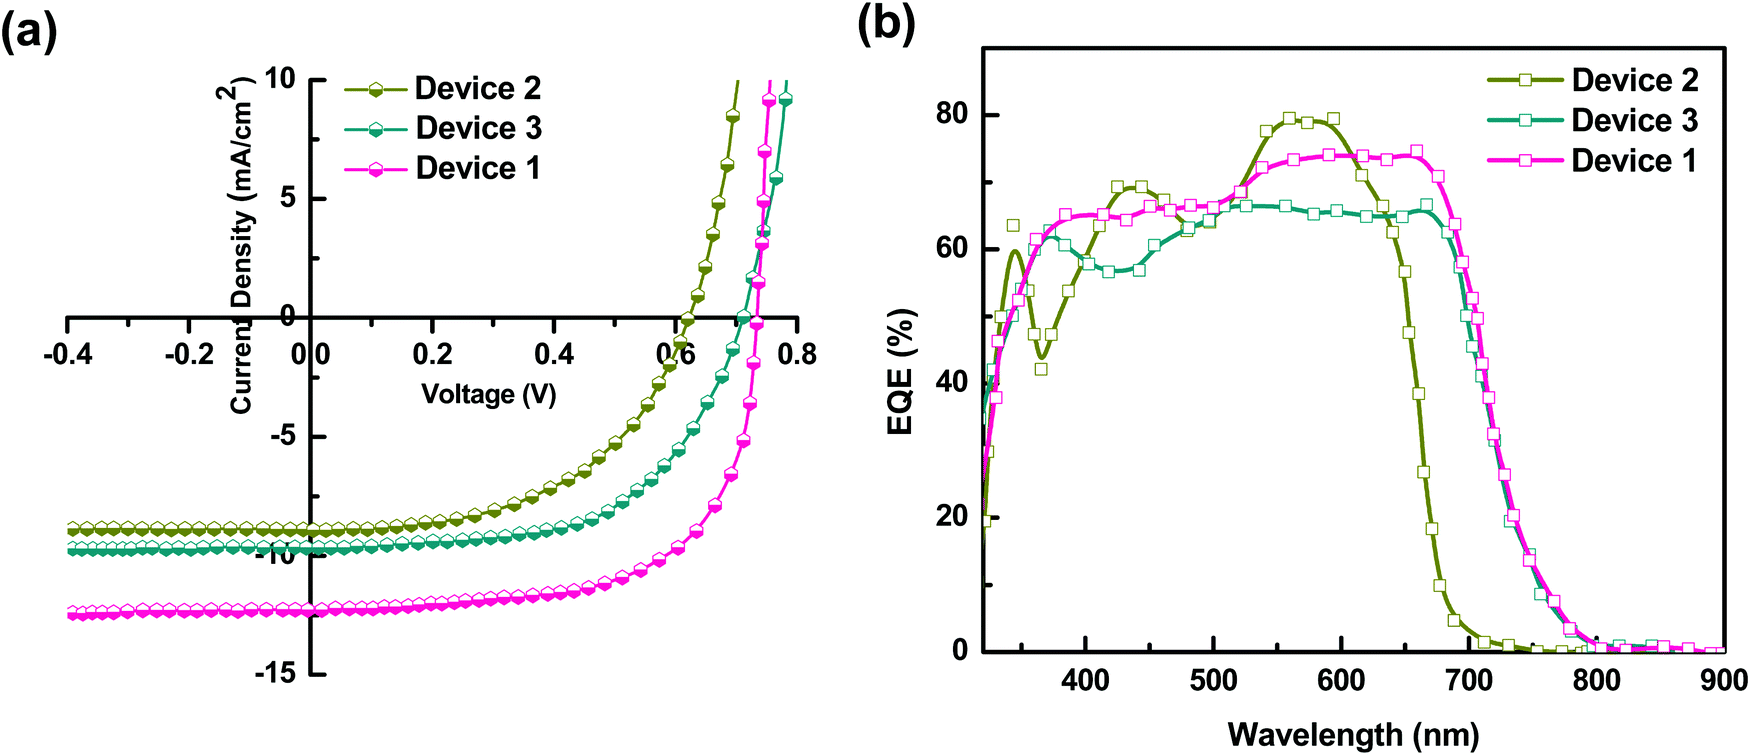 Enhancement In Performance Of Ternary Blend Polymer Solar Cells Using A Pedot Pss Graphene Oxide Hole Transport Layer Via Forster Resonance Energy Transfer And Balanced Charge Transport Materials Advances Rsc Publishing